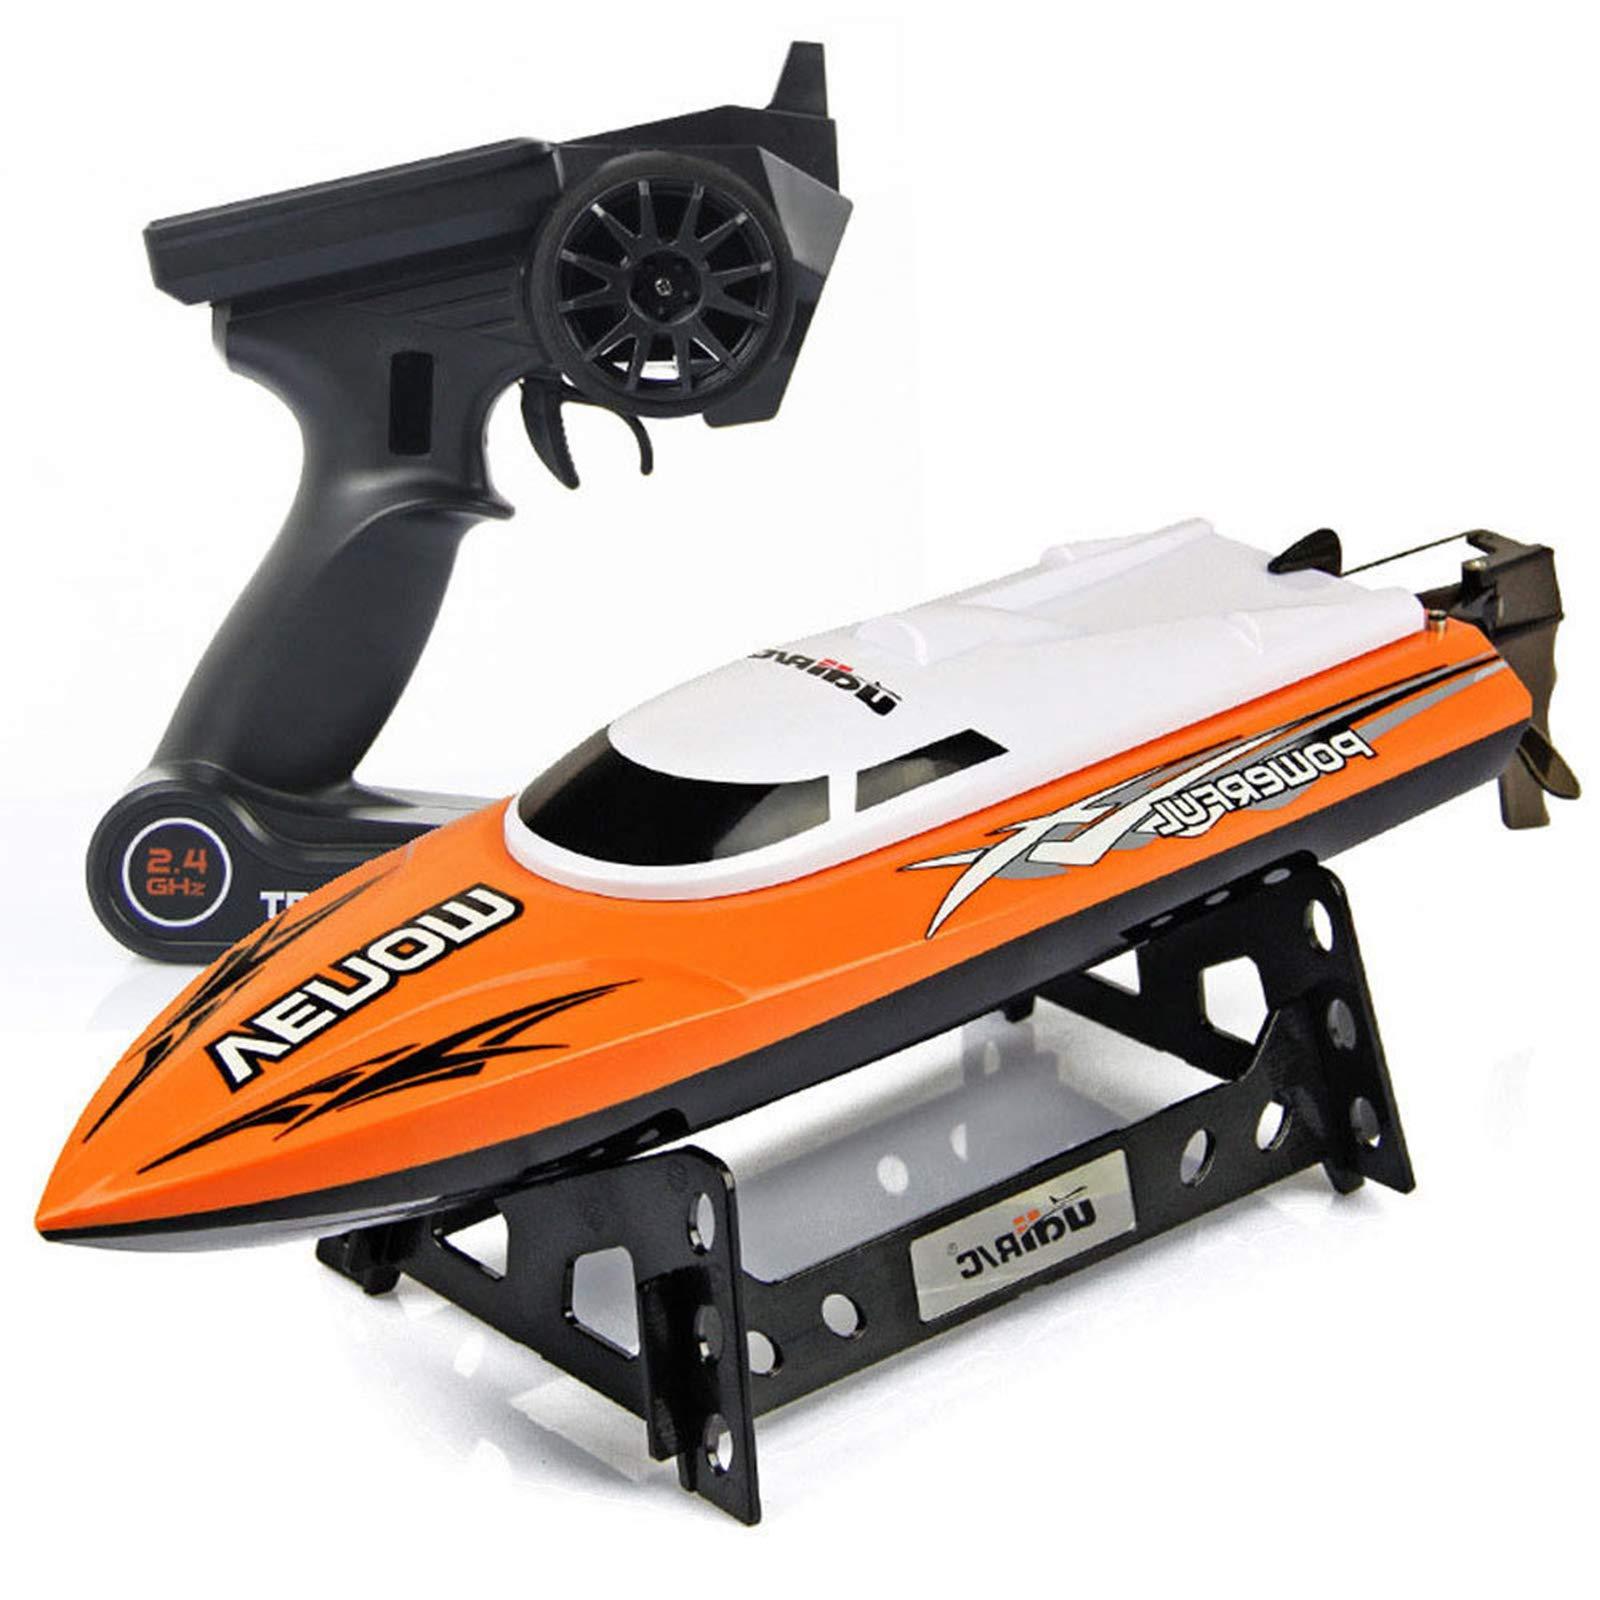 Used Rc Model Boats For Sale: Used Boats: More Bang for Your Buck!